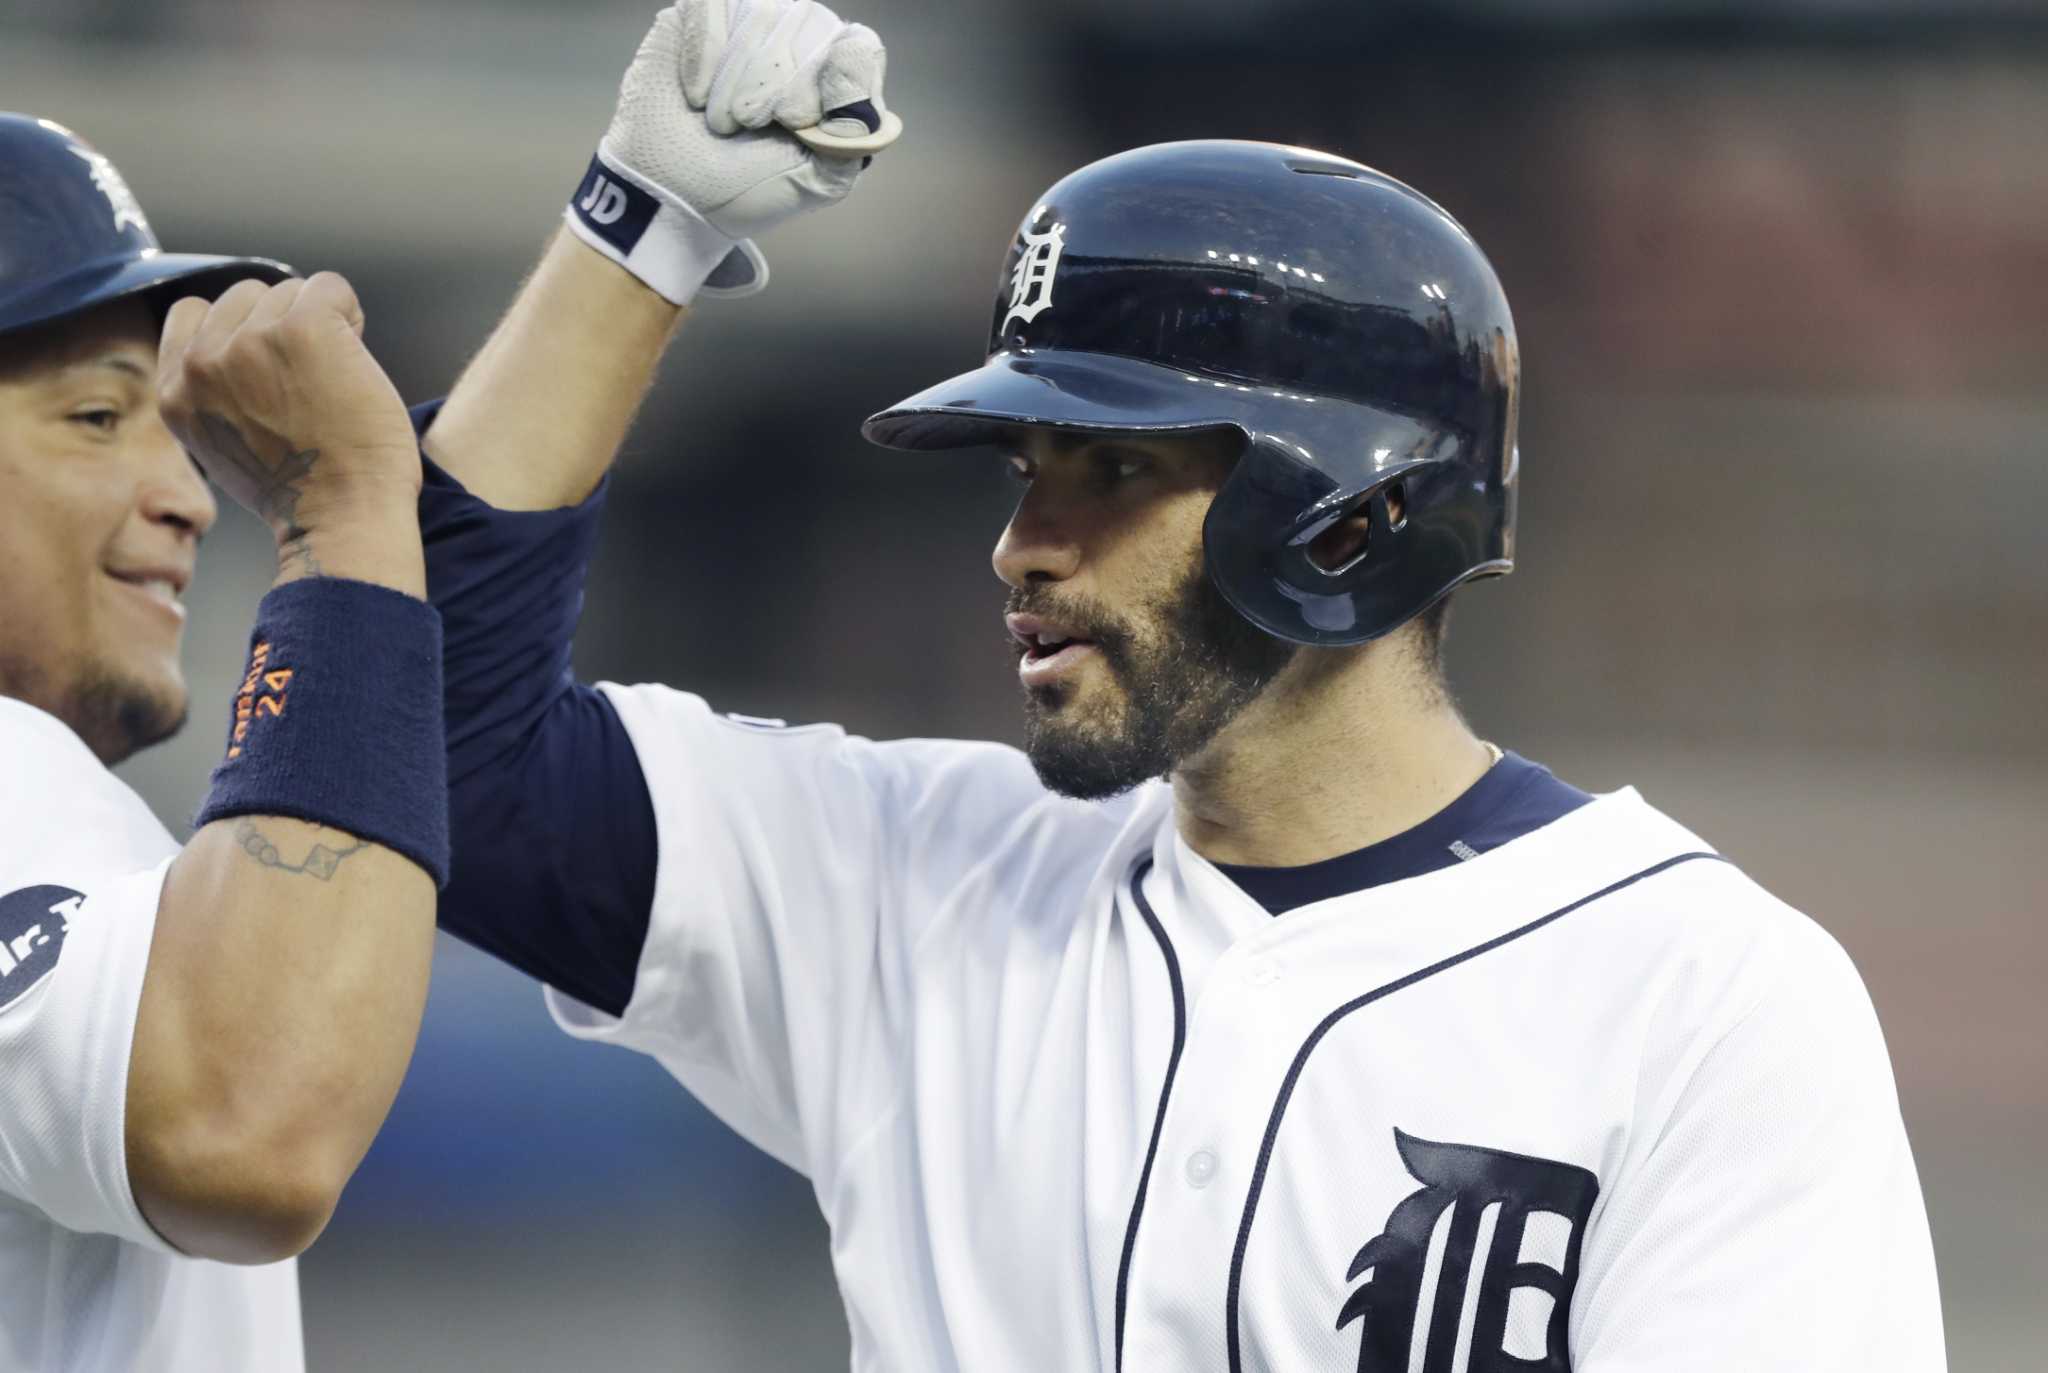 How J.D. Martinez went from struggling Astro to fierce Tiger